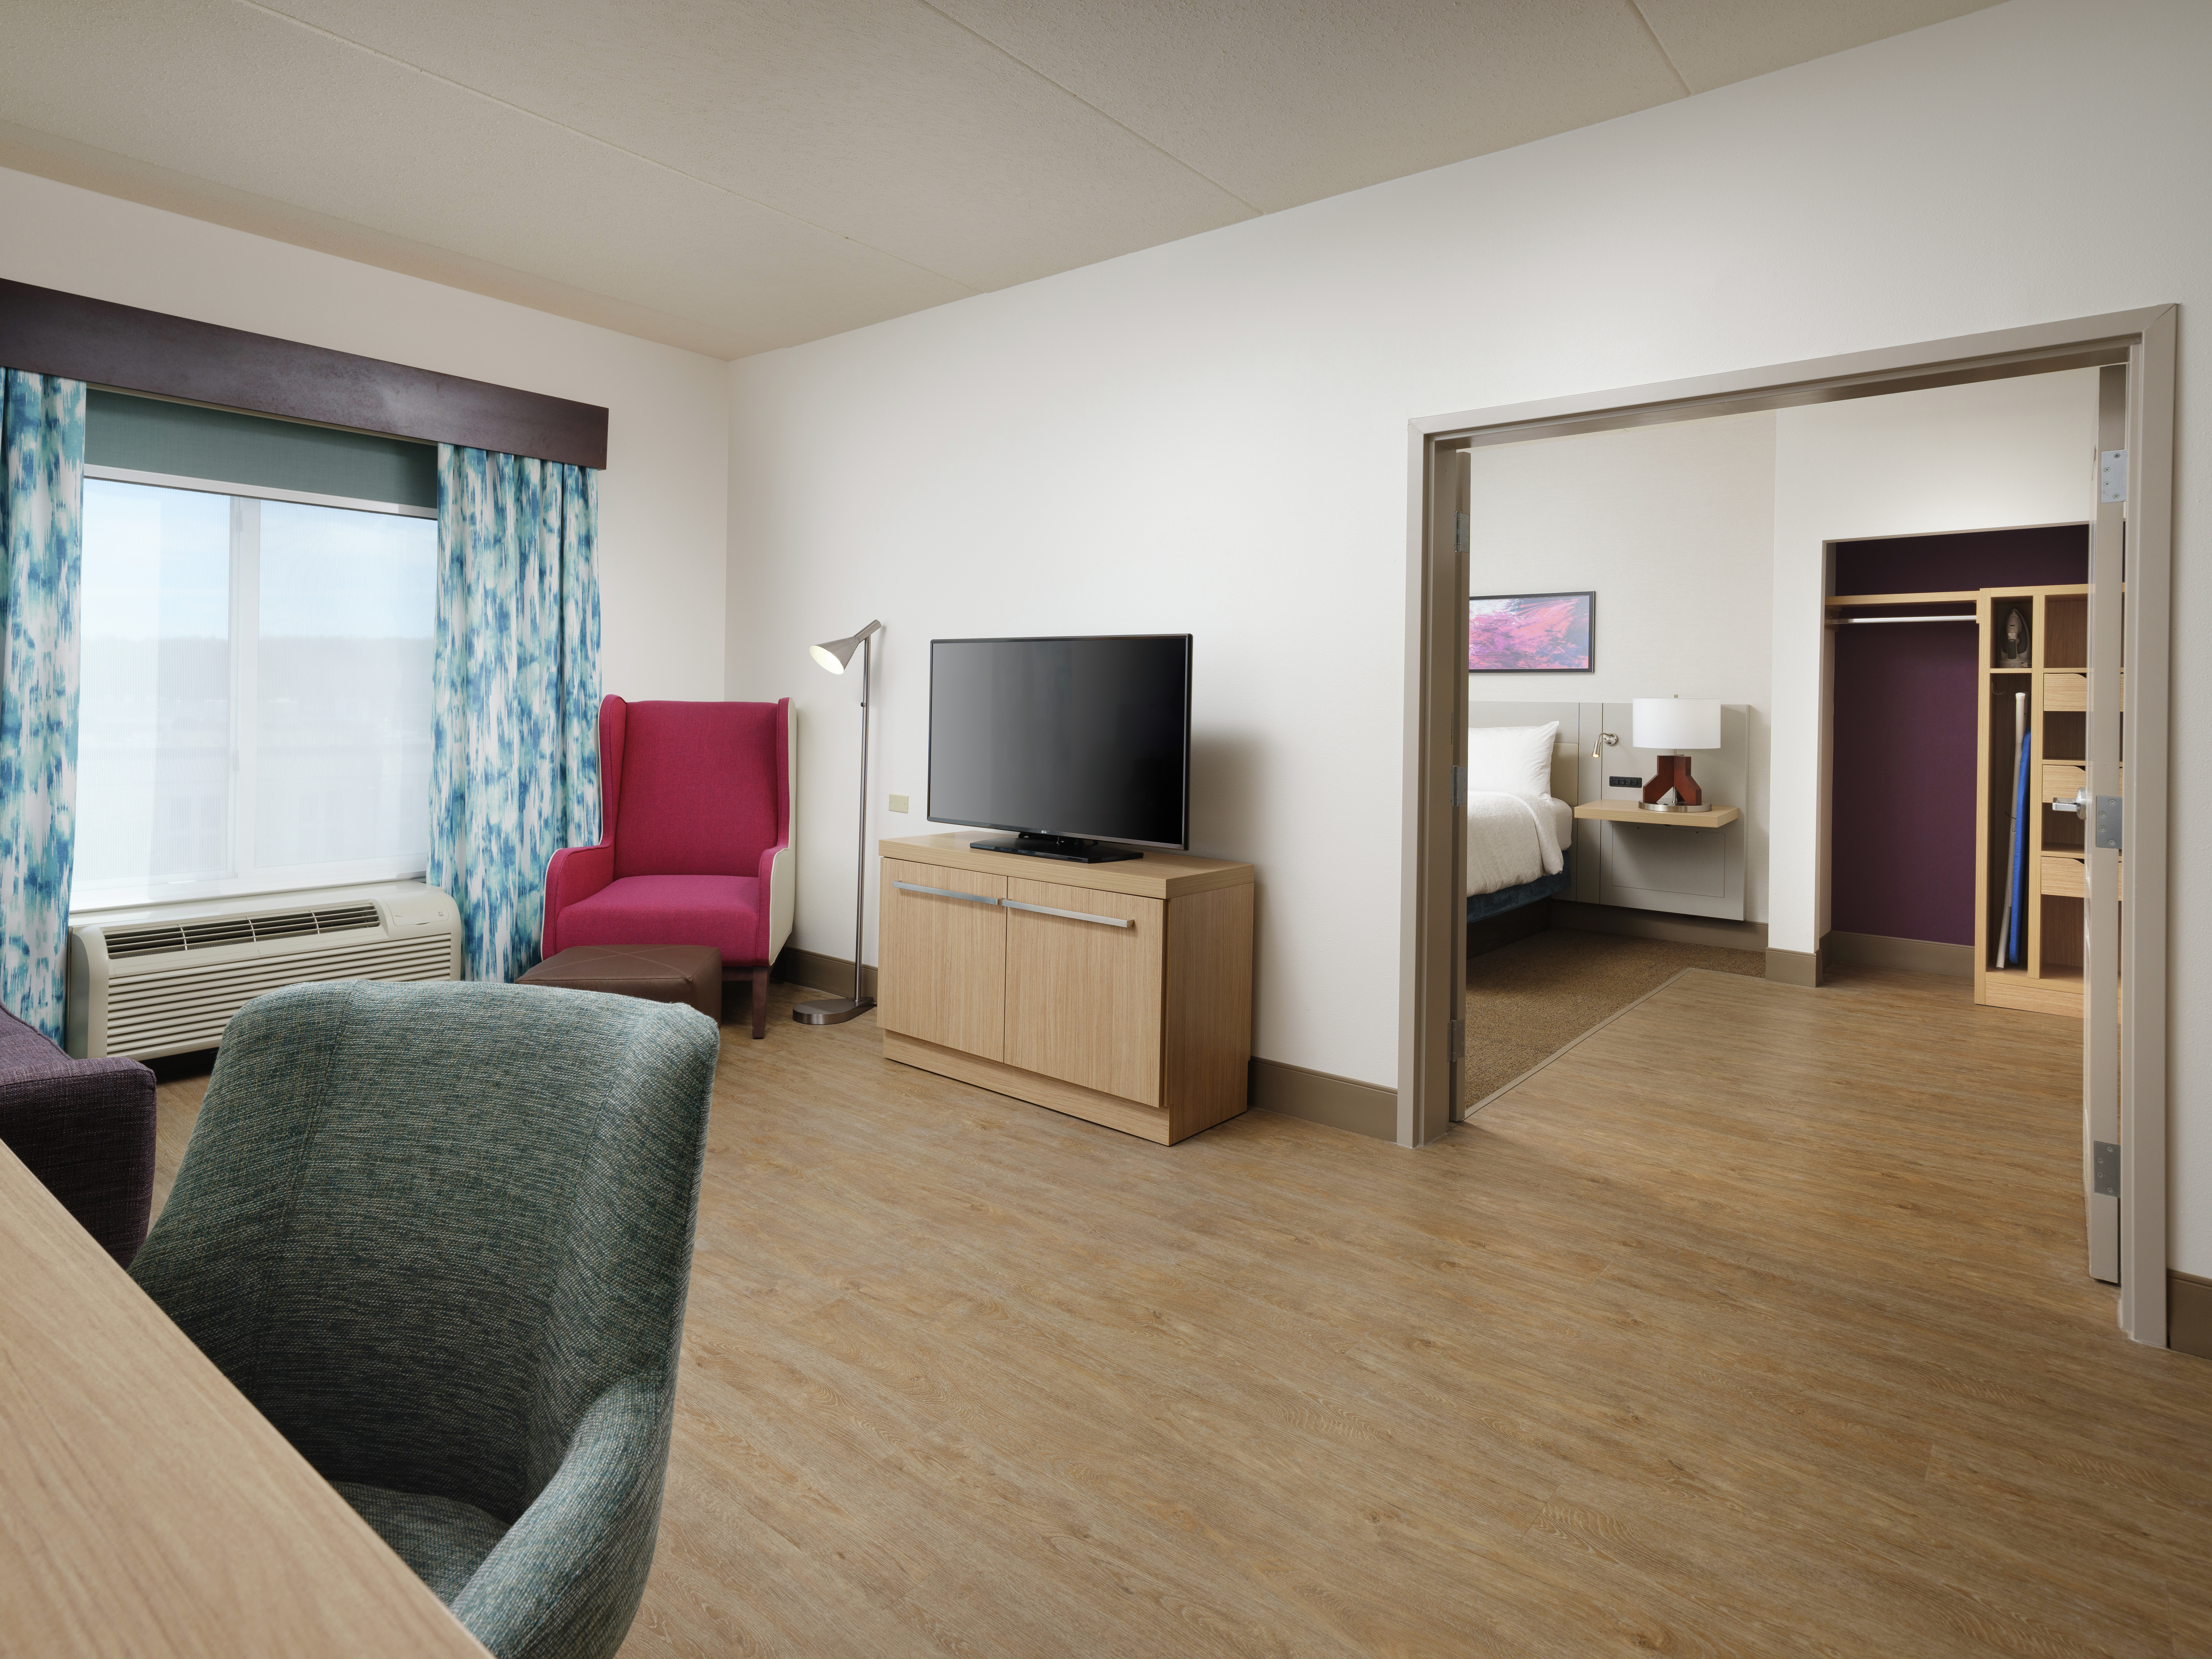 King Suite with Work Desk, Lounge Area, Room Technology, Bed, and Closet